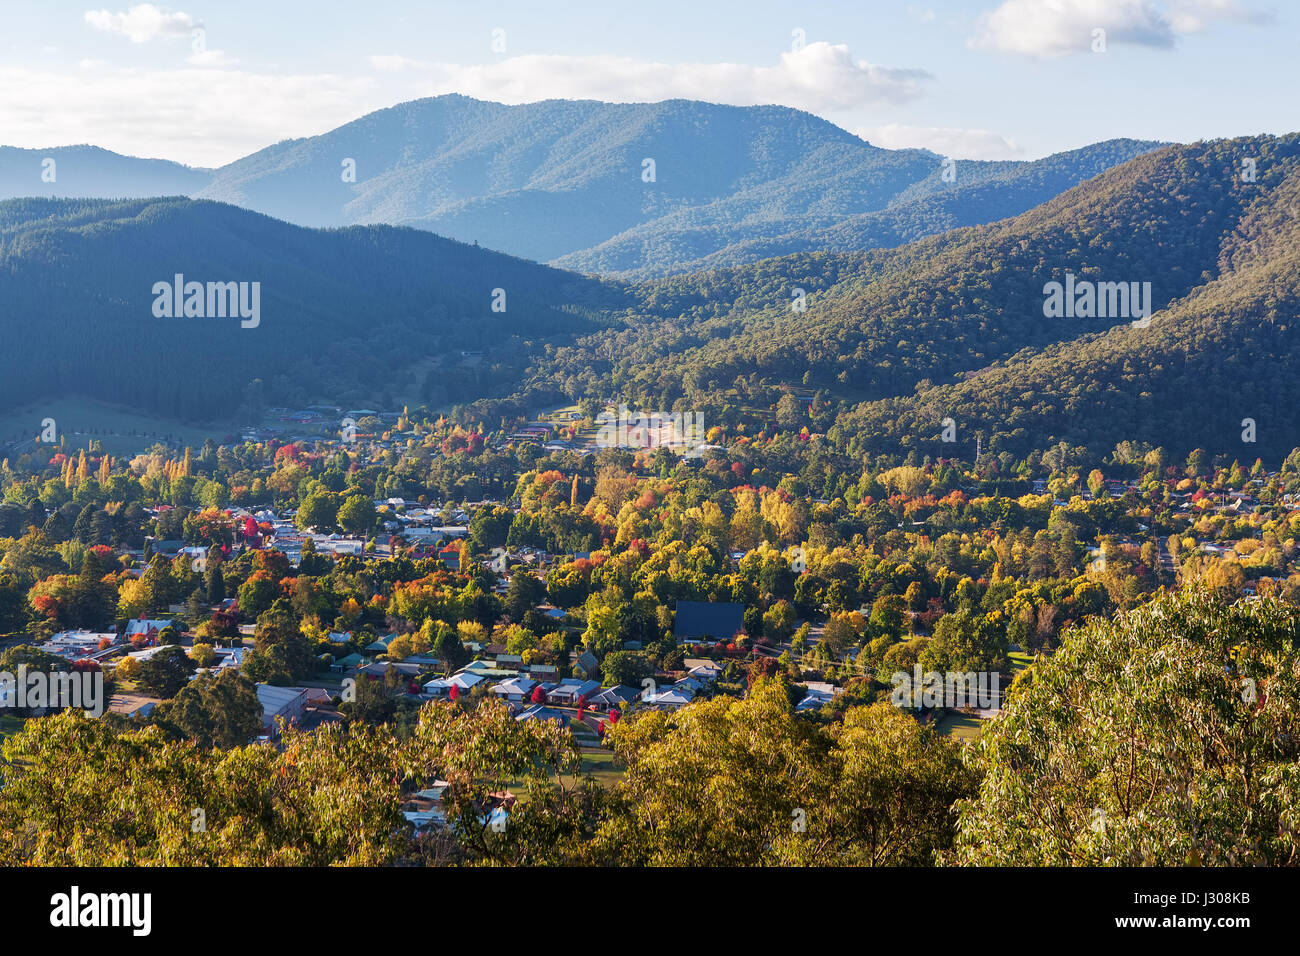 Aerial view of Bright - small town in Australian countryside. Fall colors in full swing Stock Photo